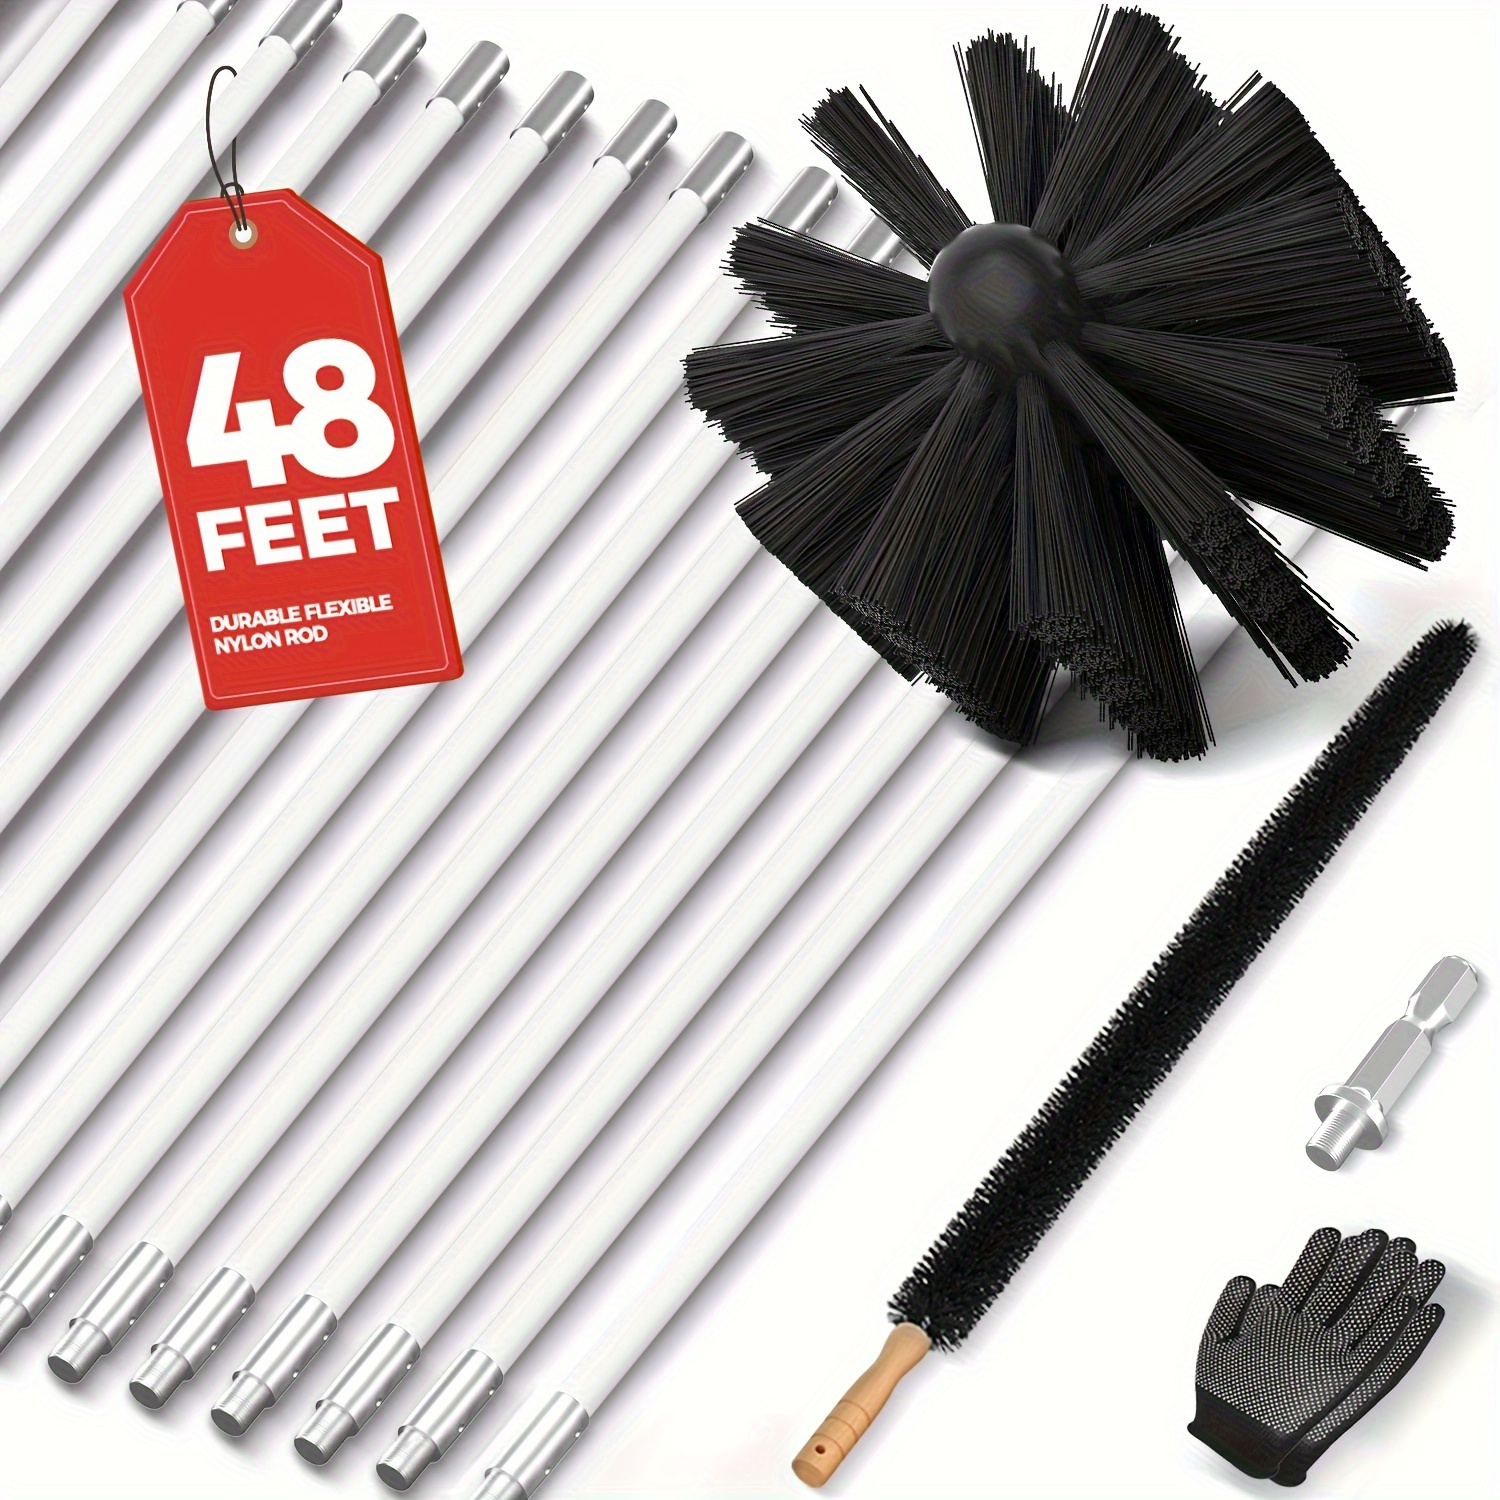 

48 Feet Dryer Vent Cleaning Kit, Flexible Lint Brush With Drill Bit Attachment, Fireplace Chimney Brush That Extends Up To 48 Feet For Easy Cleaning, With Or Without A Drill